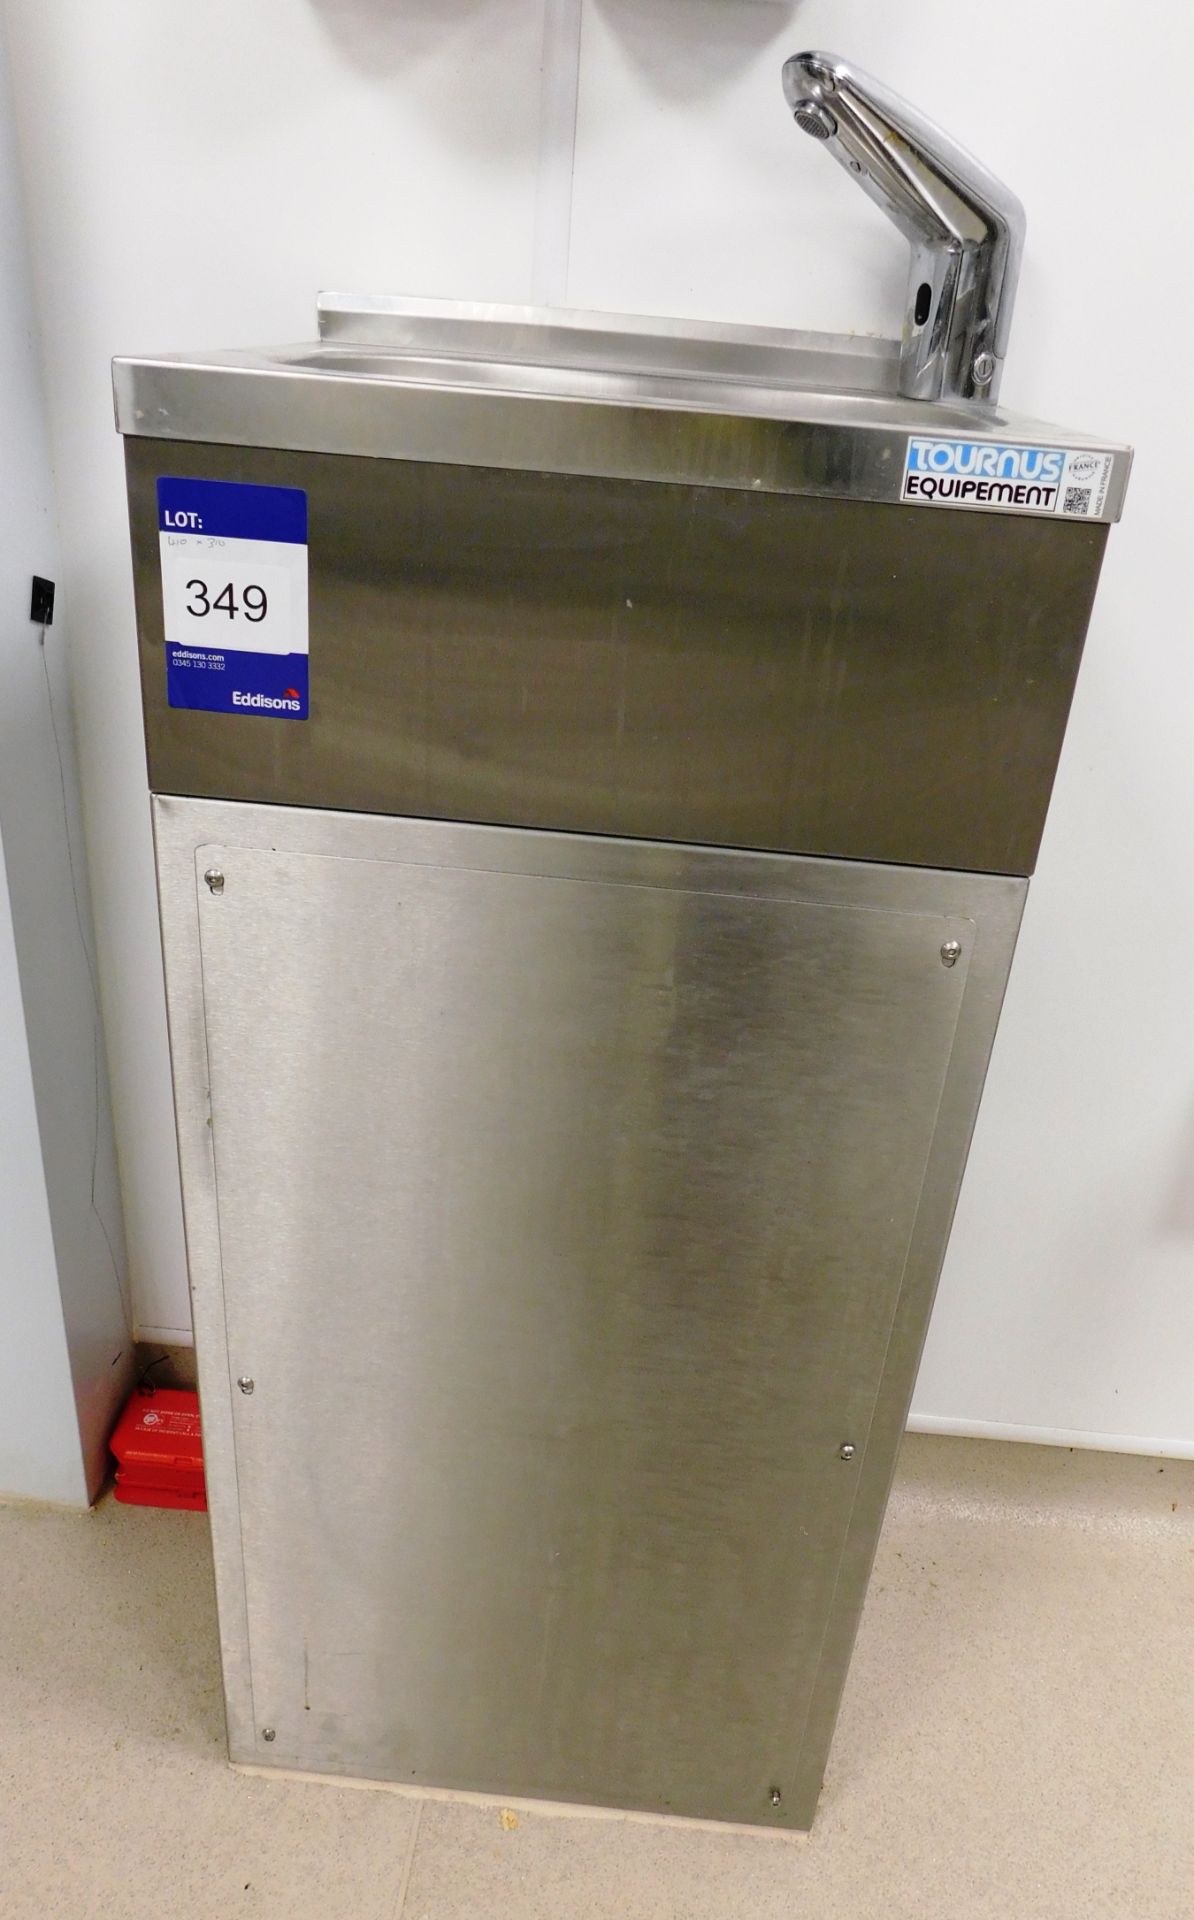 Stainless Steel Automatic Handwash Station (requires disconnection)